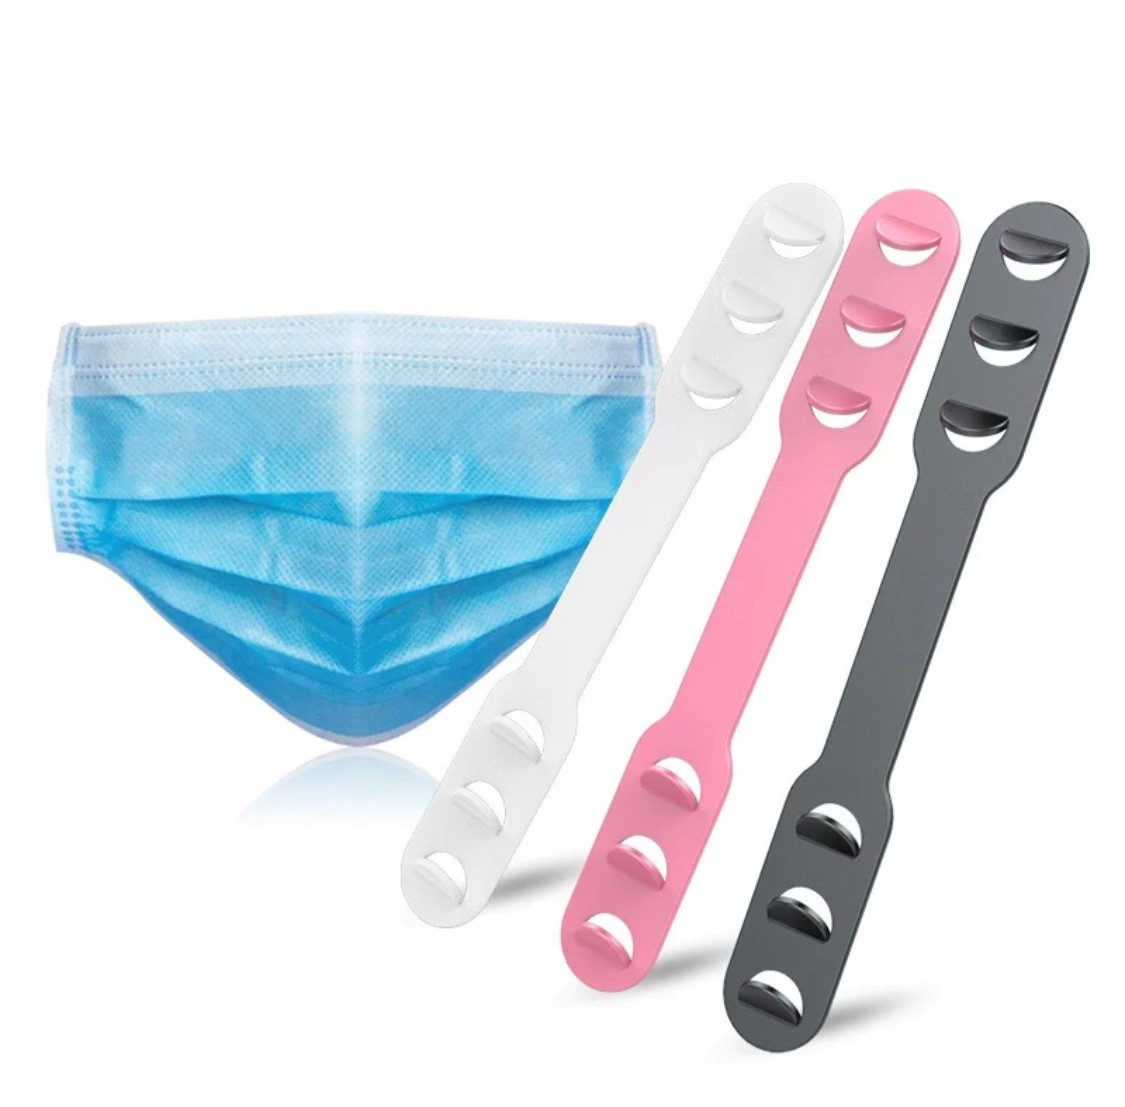 White Plastic Comfort Mask Strap - FREE Shipping! - Awareness Products ...